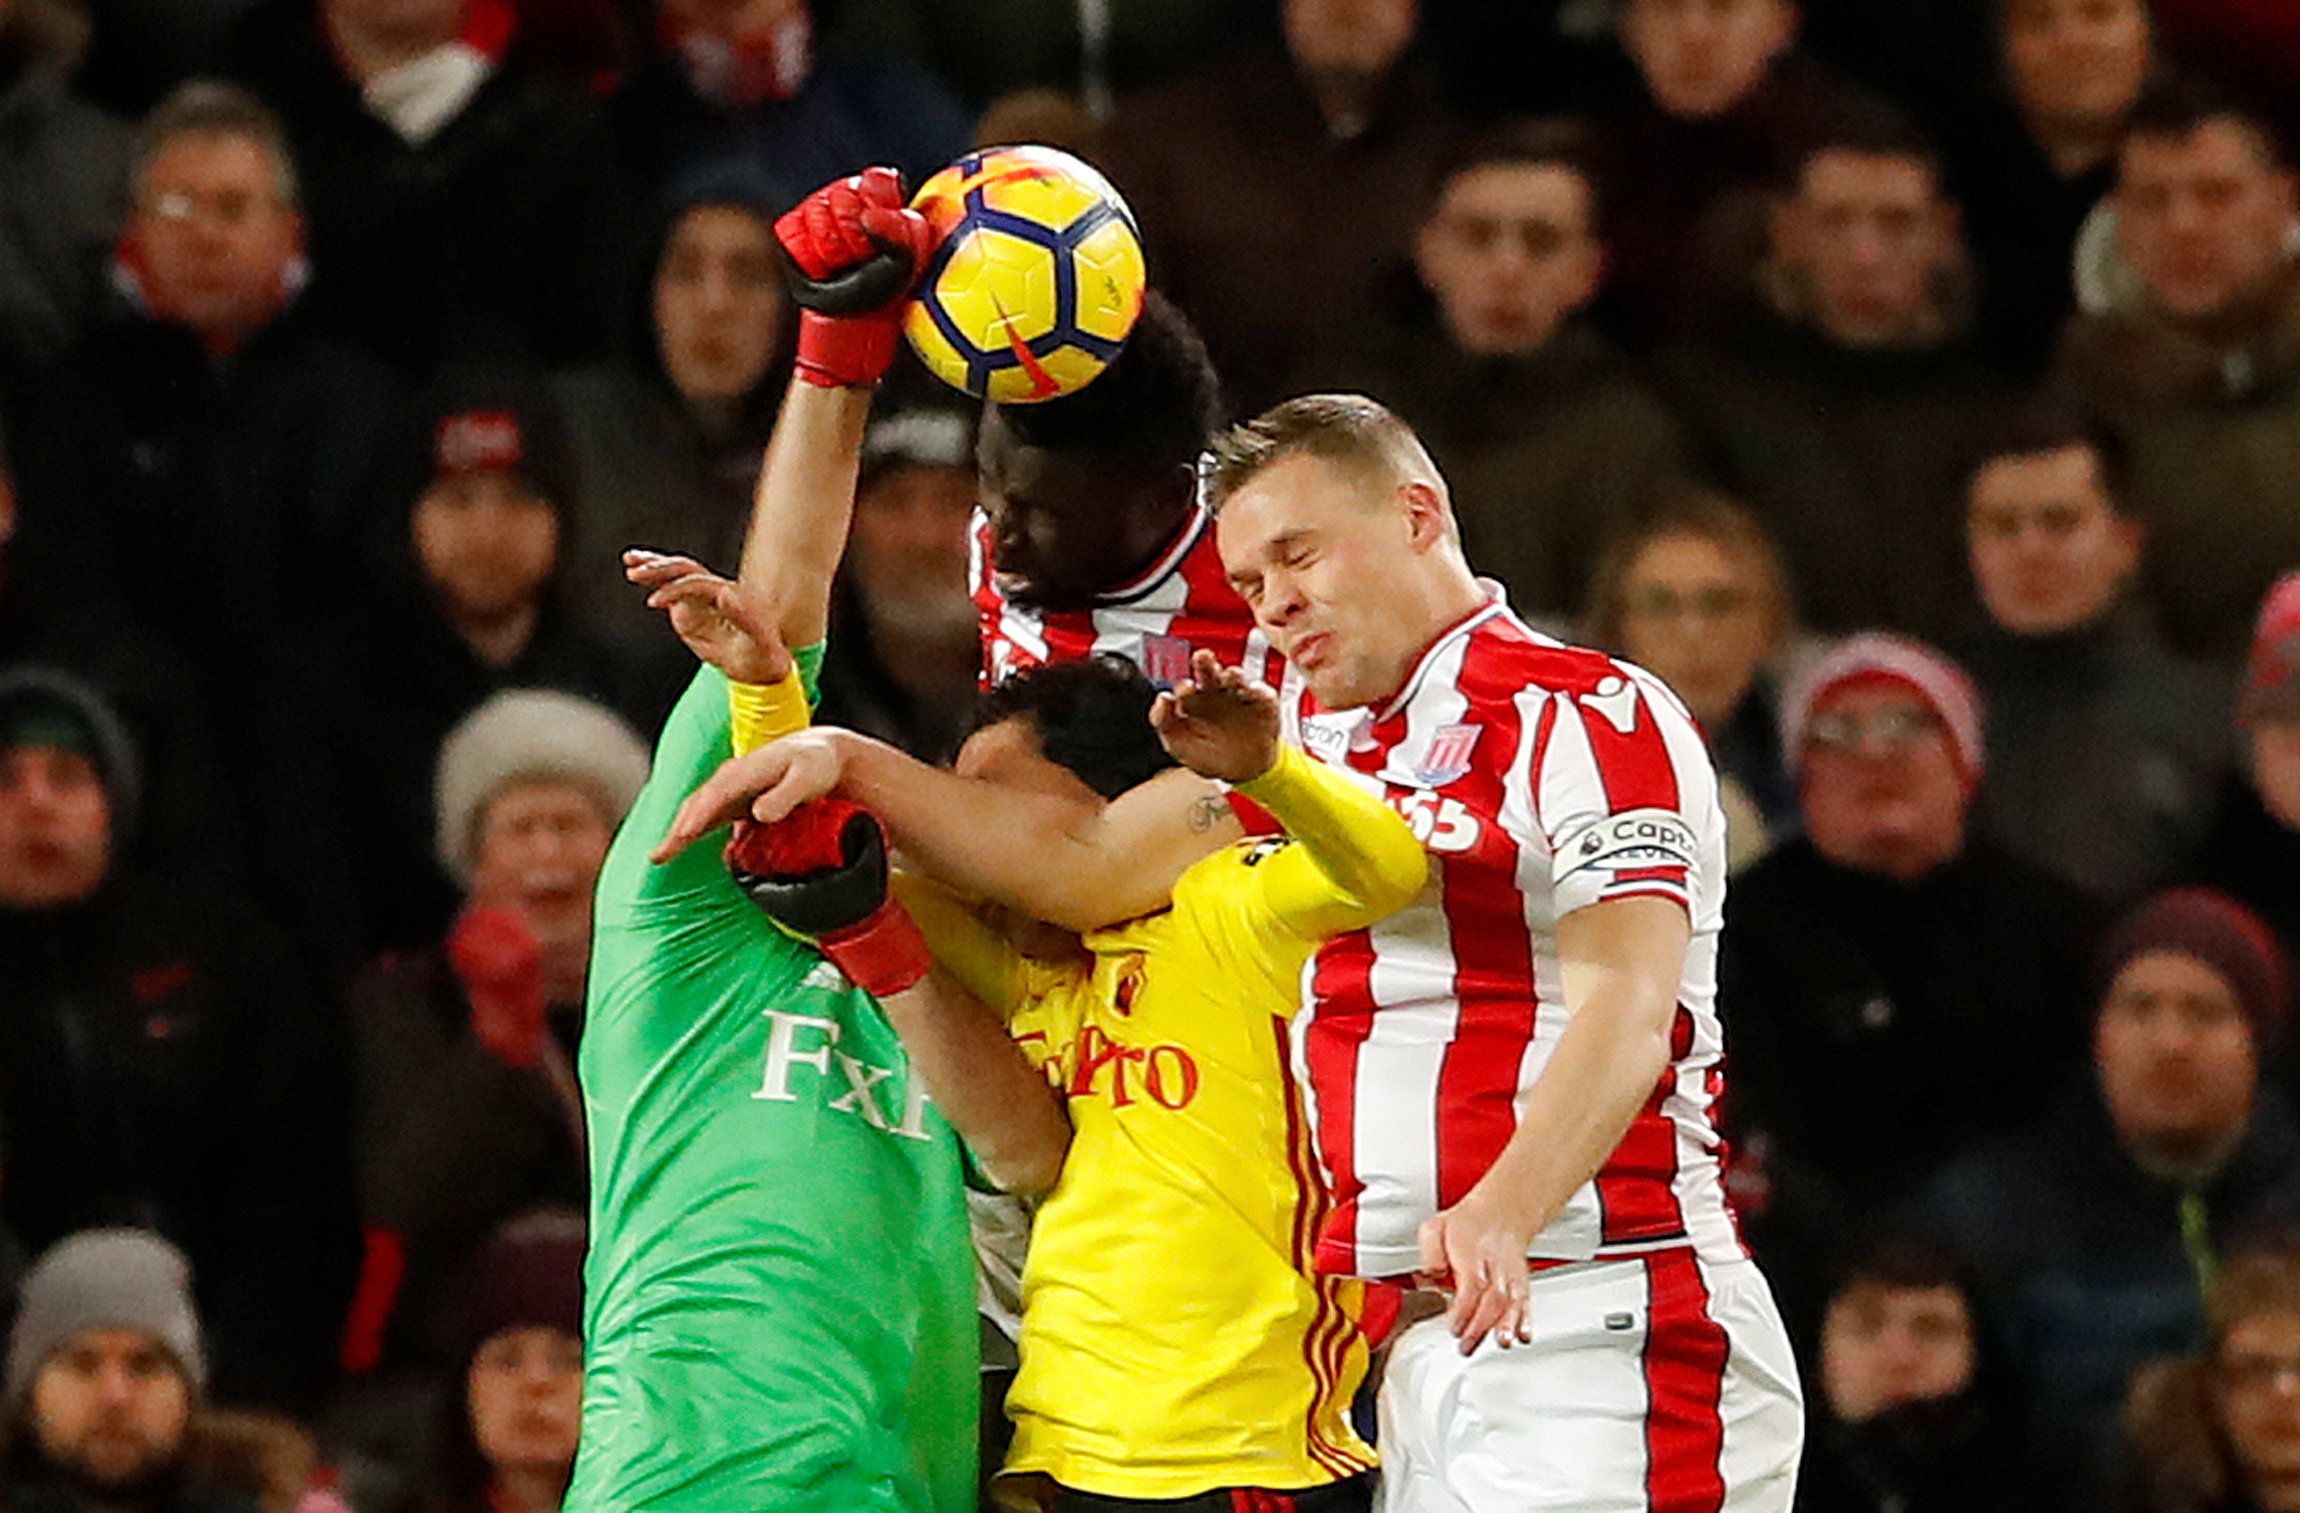 Soccer Football - Premier League - Stoke City vs Watford - bet365 Stadium, Stoke-on-Trent, Britain - January 31, 2018   Watford's Orestis Karnezis in action with Stoke City's Ryan Shawcross            Action Images via Reuters/Andrew Boyers    EDITORIAL USE ONLY. No use with unauthorized audio, video, data, fixture lists, club/league logos or 